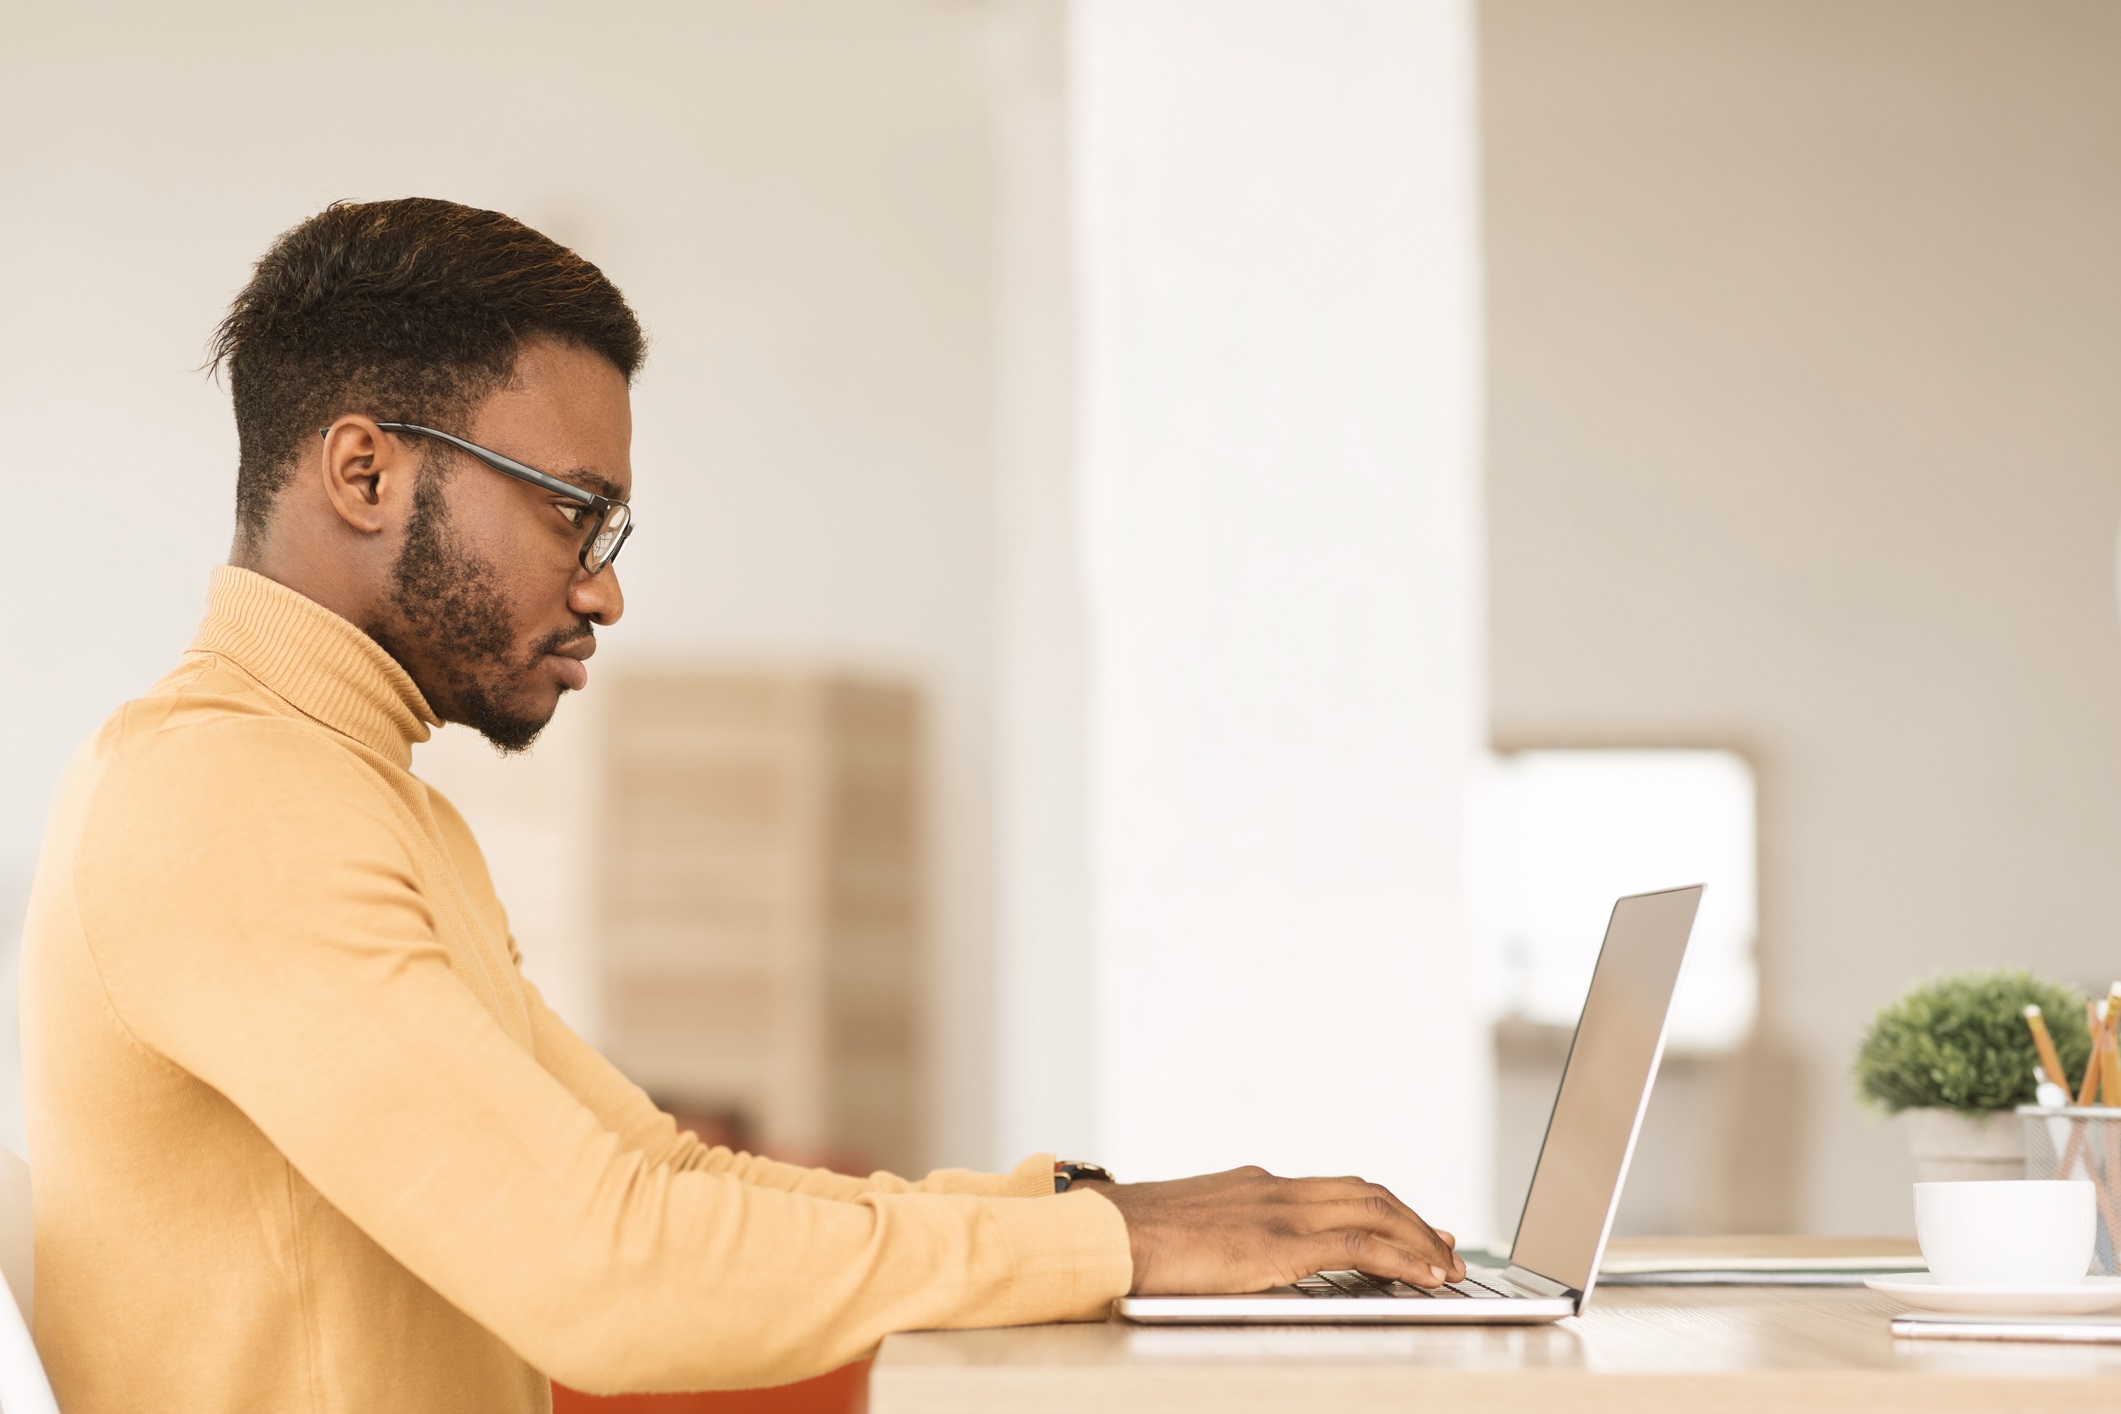 A black man wearing glasses and a yellow turtleneck works on his laptop for "Populating Your Google Business Profile" blog.